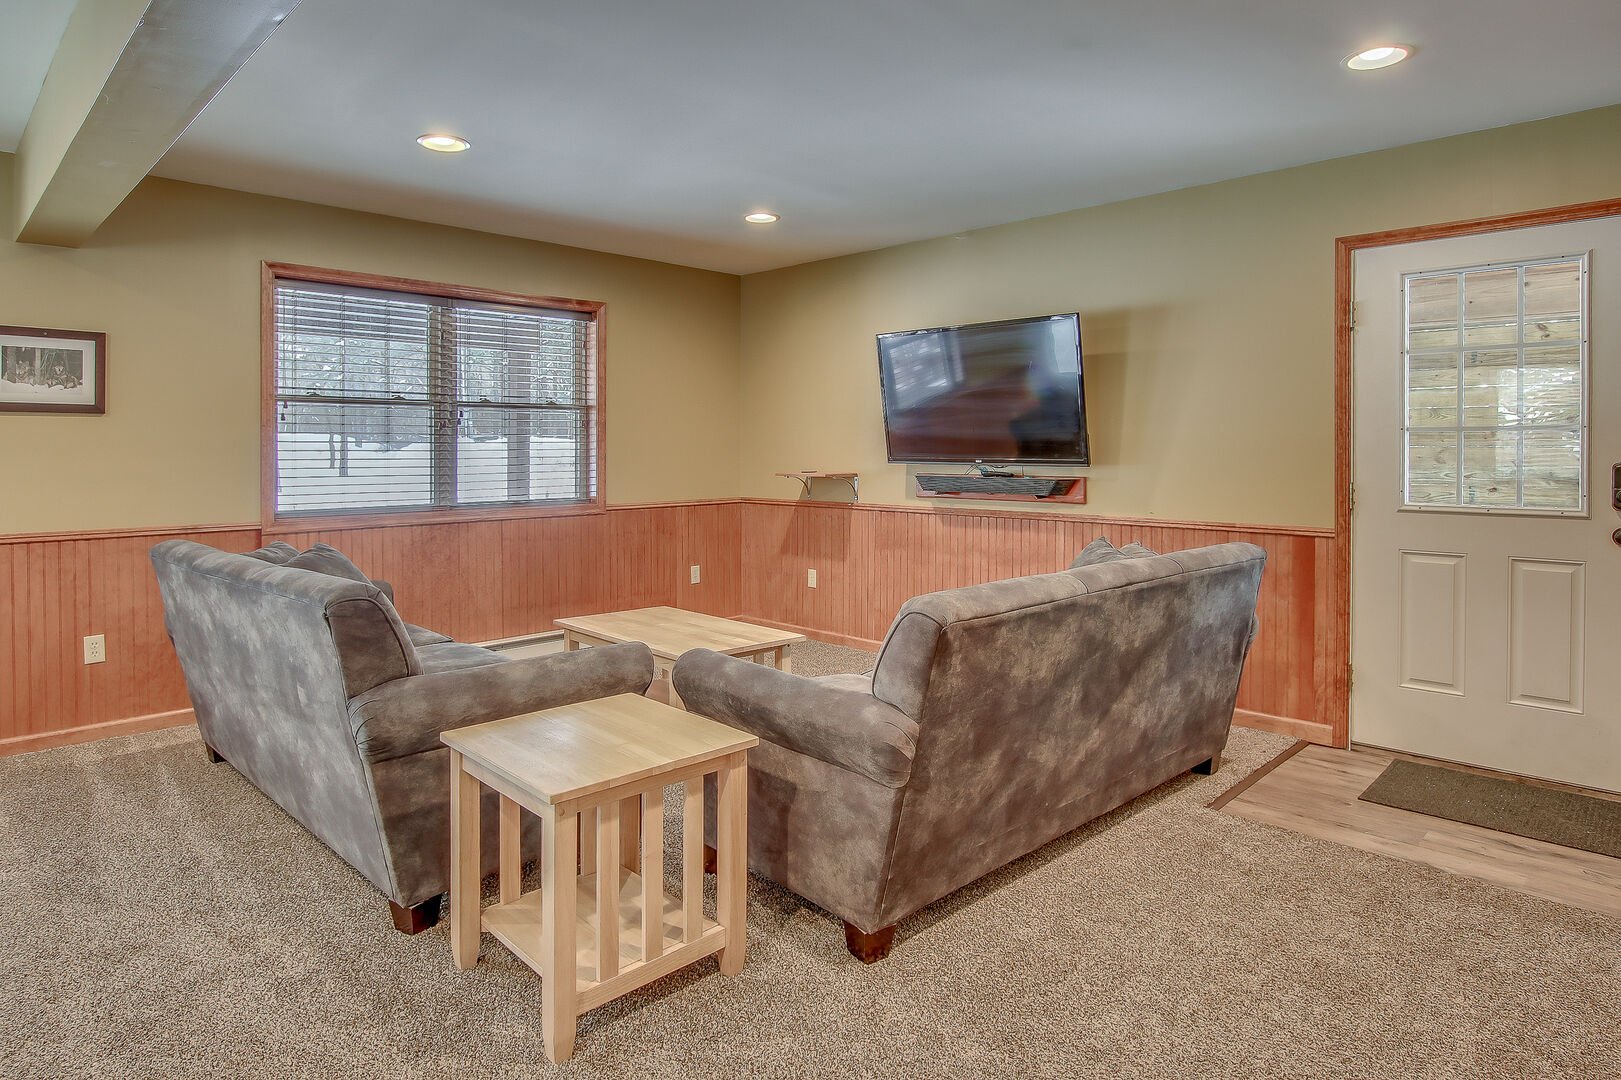 Game Room with two couches and TV